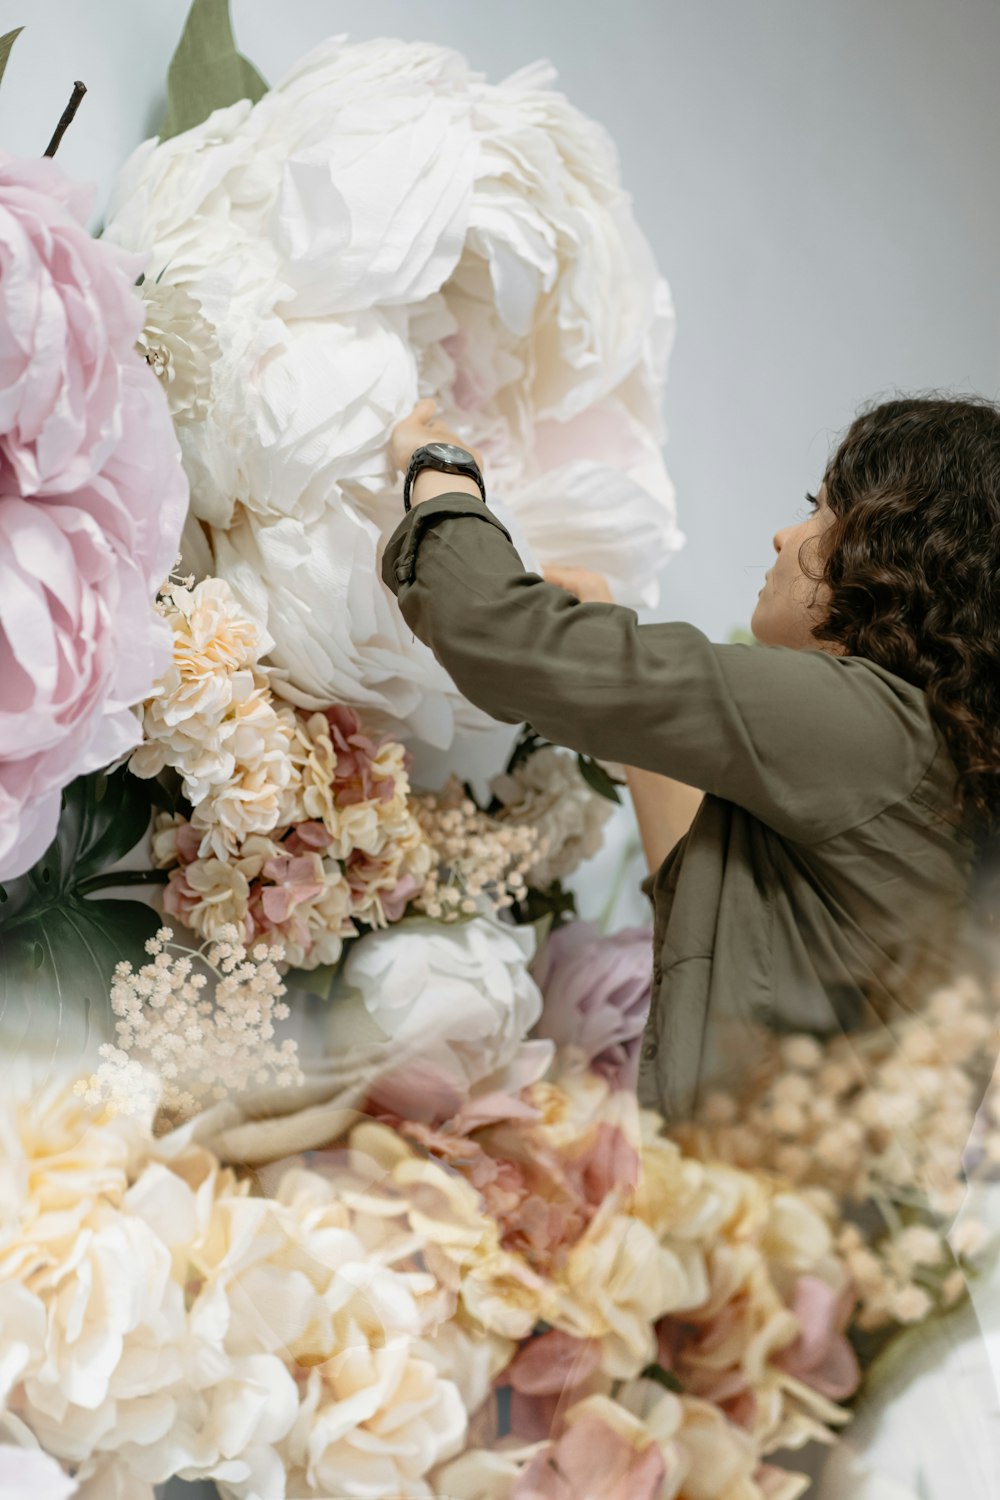 a woman is arranging flowers in a vase